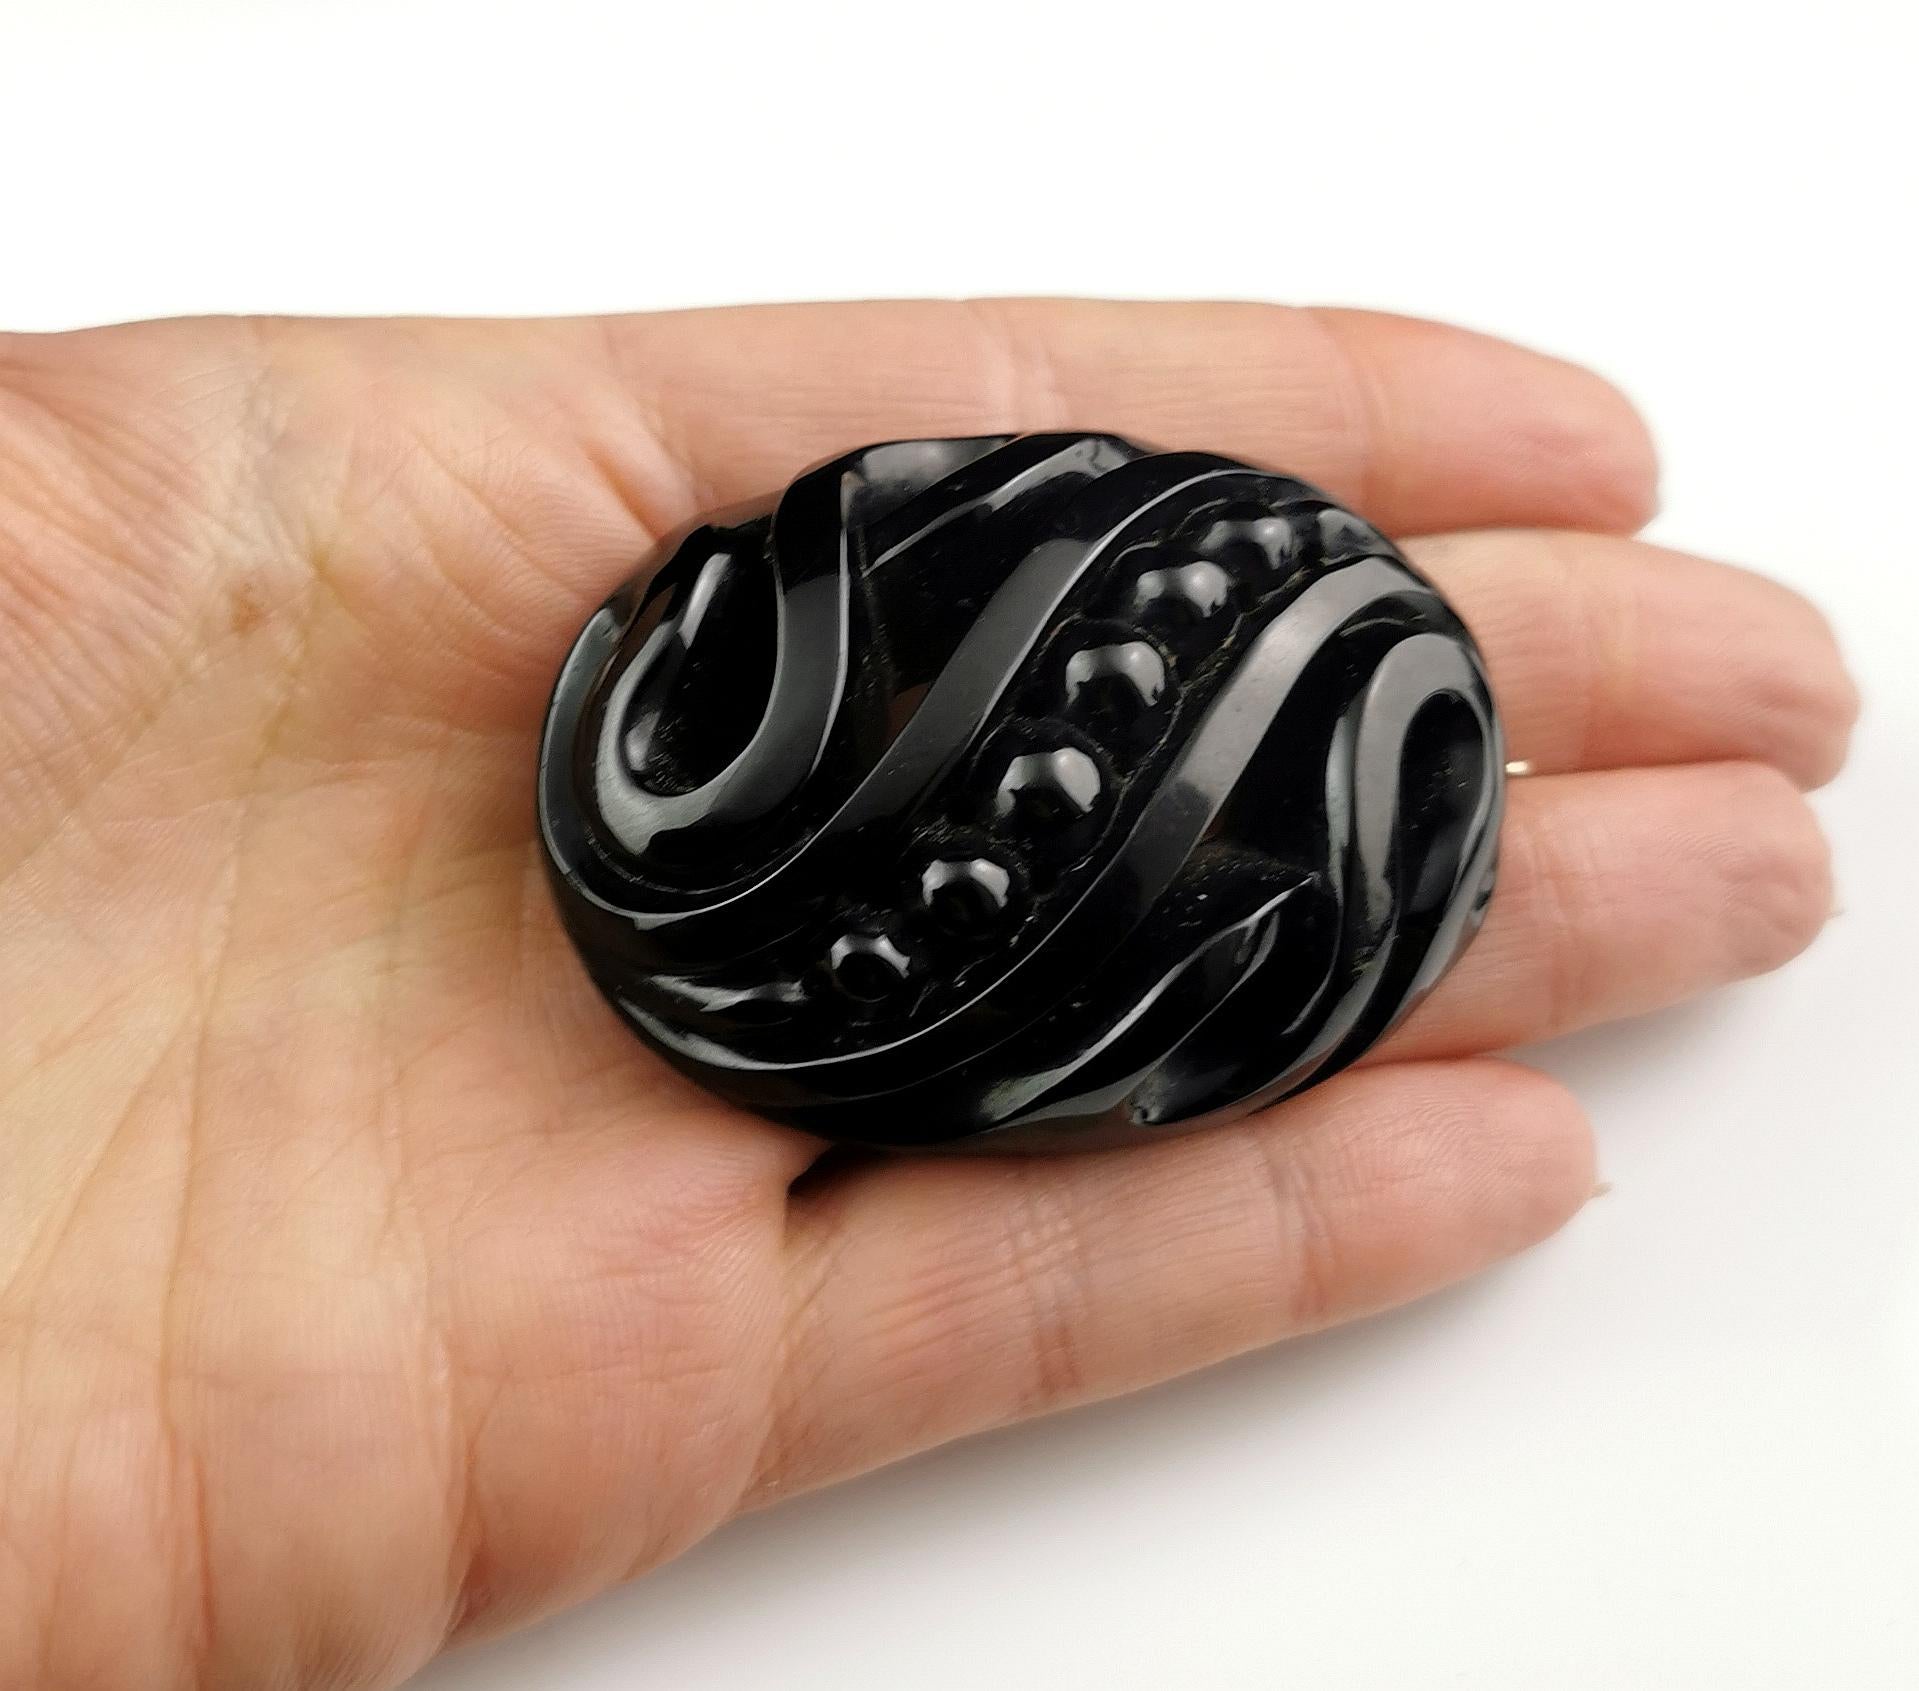 A gorgeous antique Victorian era Whitby Jet brooch.

It is an oval shaped brooch with swirl designs and beading going across the centre.

Very finely carved and polished to a high glossy shine.

A very attractive brooch.

Whitby Jet shot to